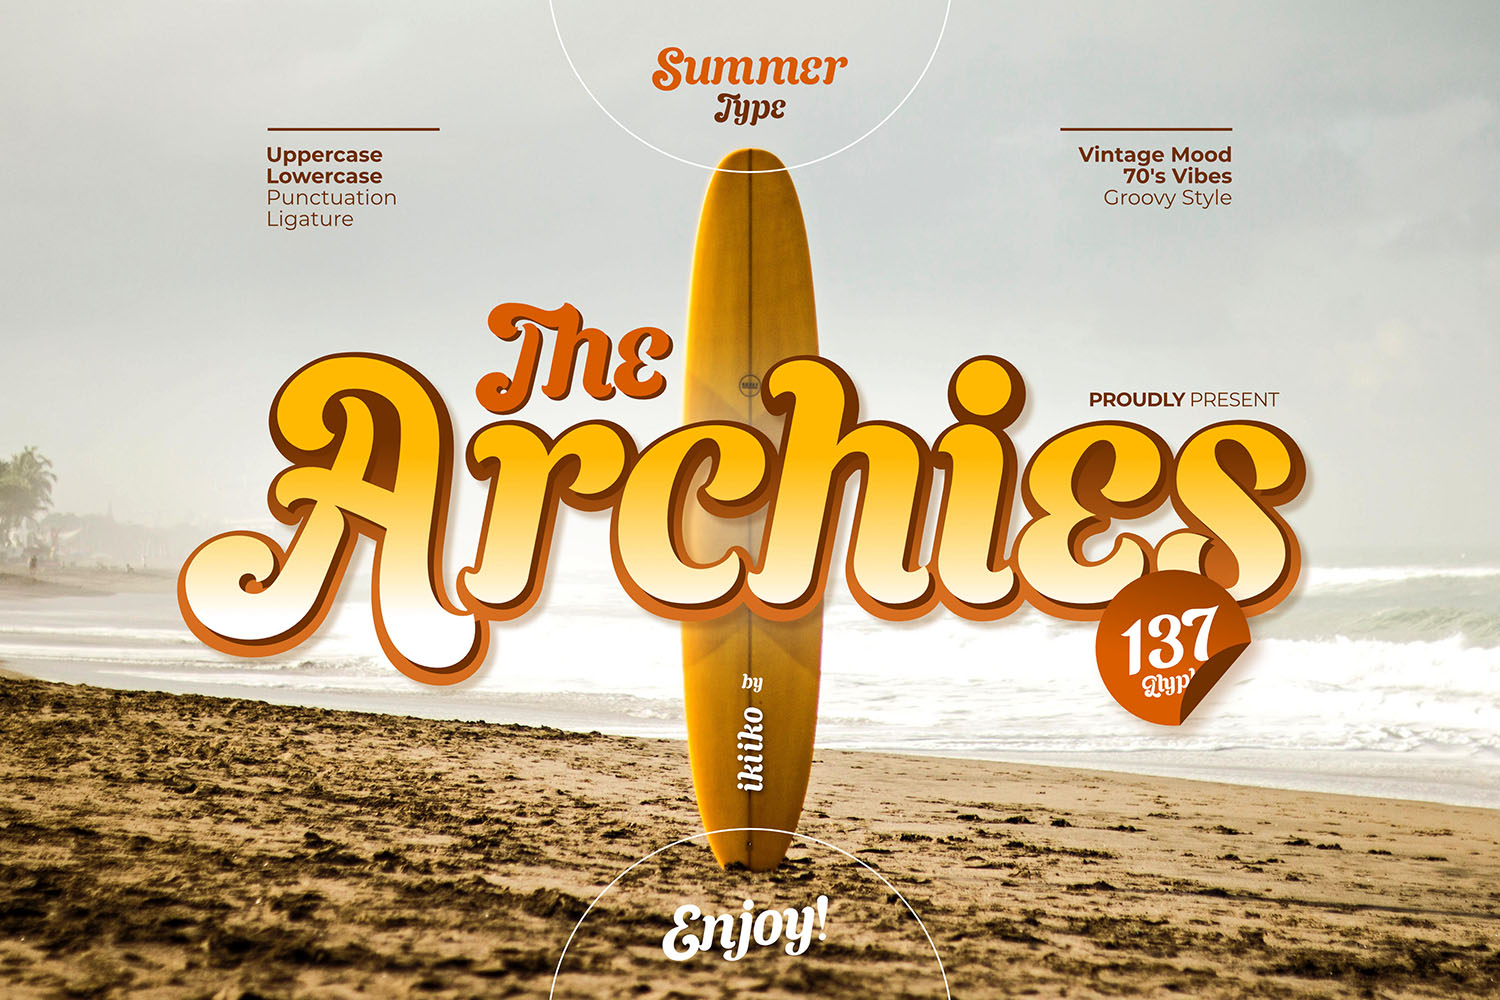 The Archies Free Font